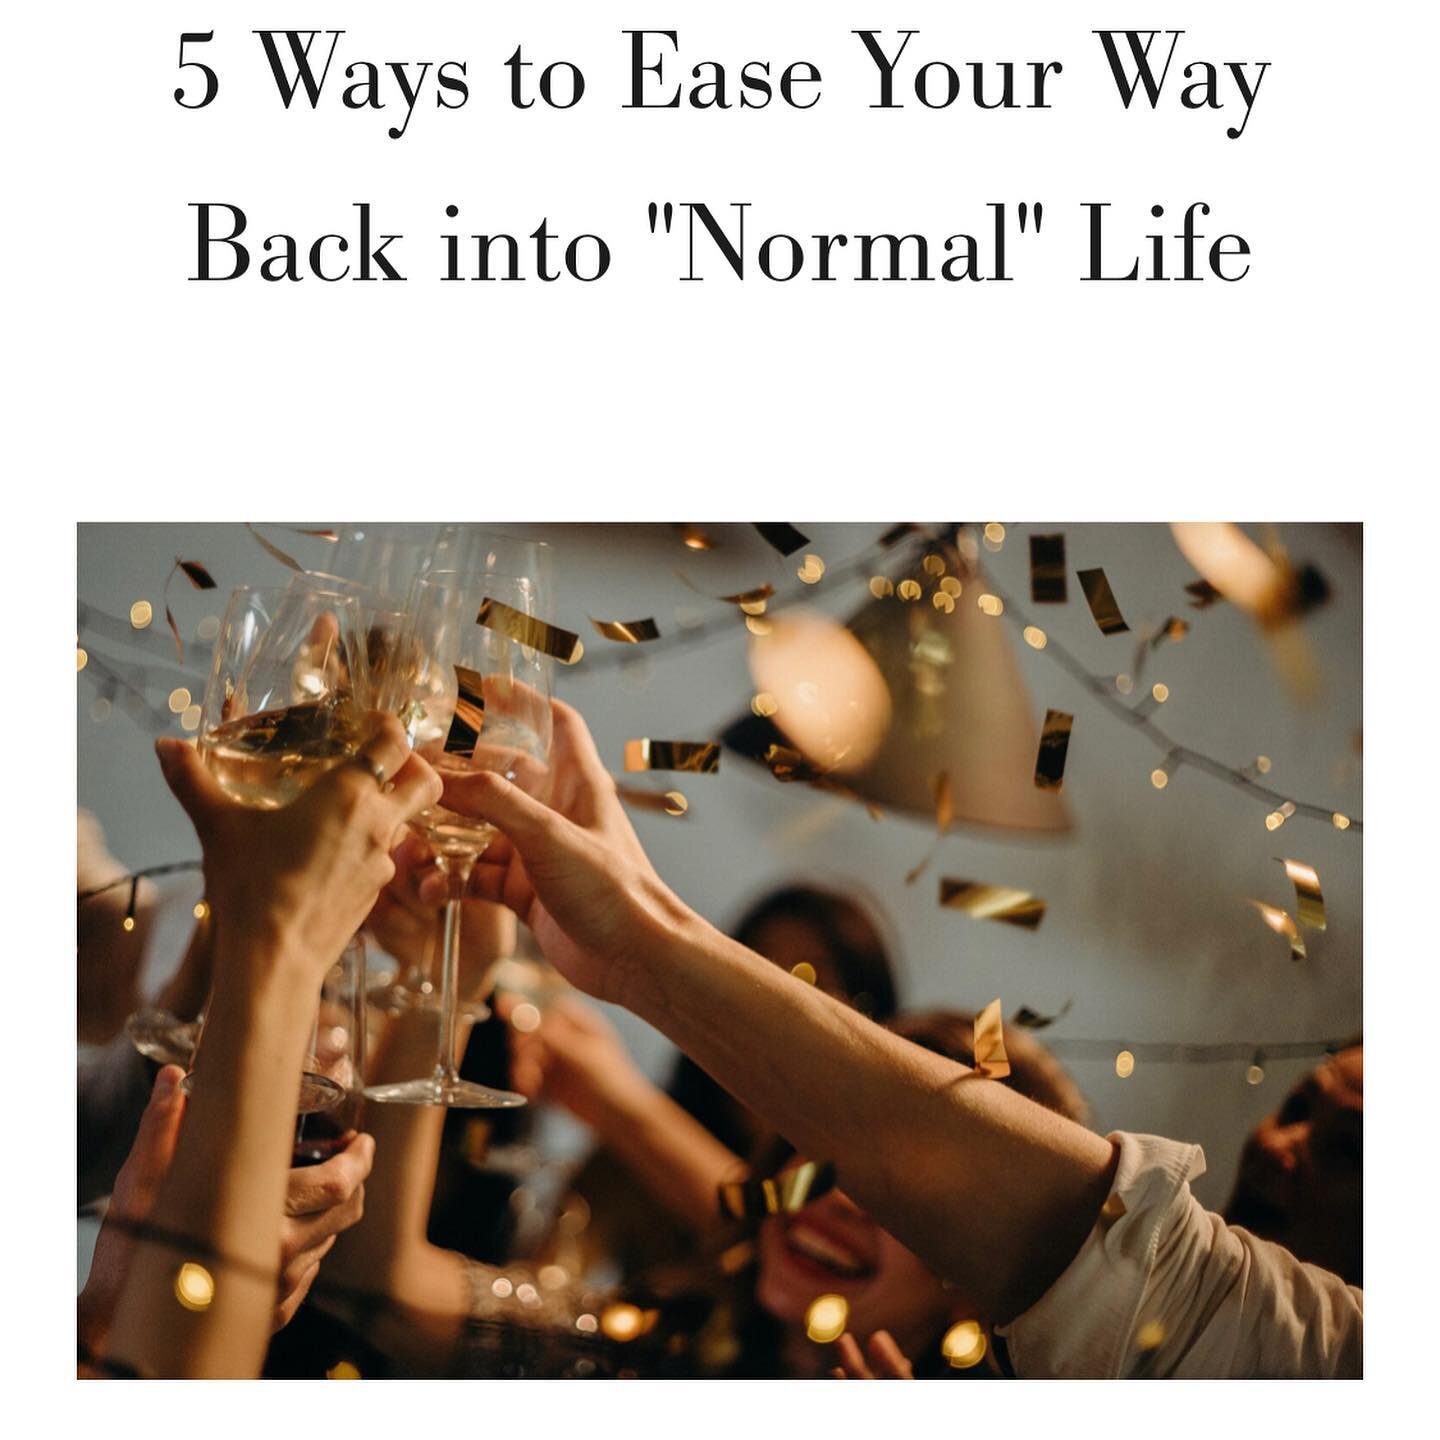 ✨New on the blog ✨

If you&rsquo;ve found yourself not knowing what to do with your hands at BBQ&rsquo;s and/or forgot how to be in social settings all together, this post is for you 😆 

5 ways to ease your way back into &ldquo;normal&rdquo; life is